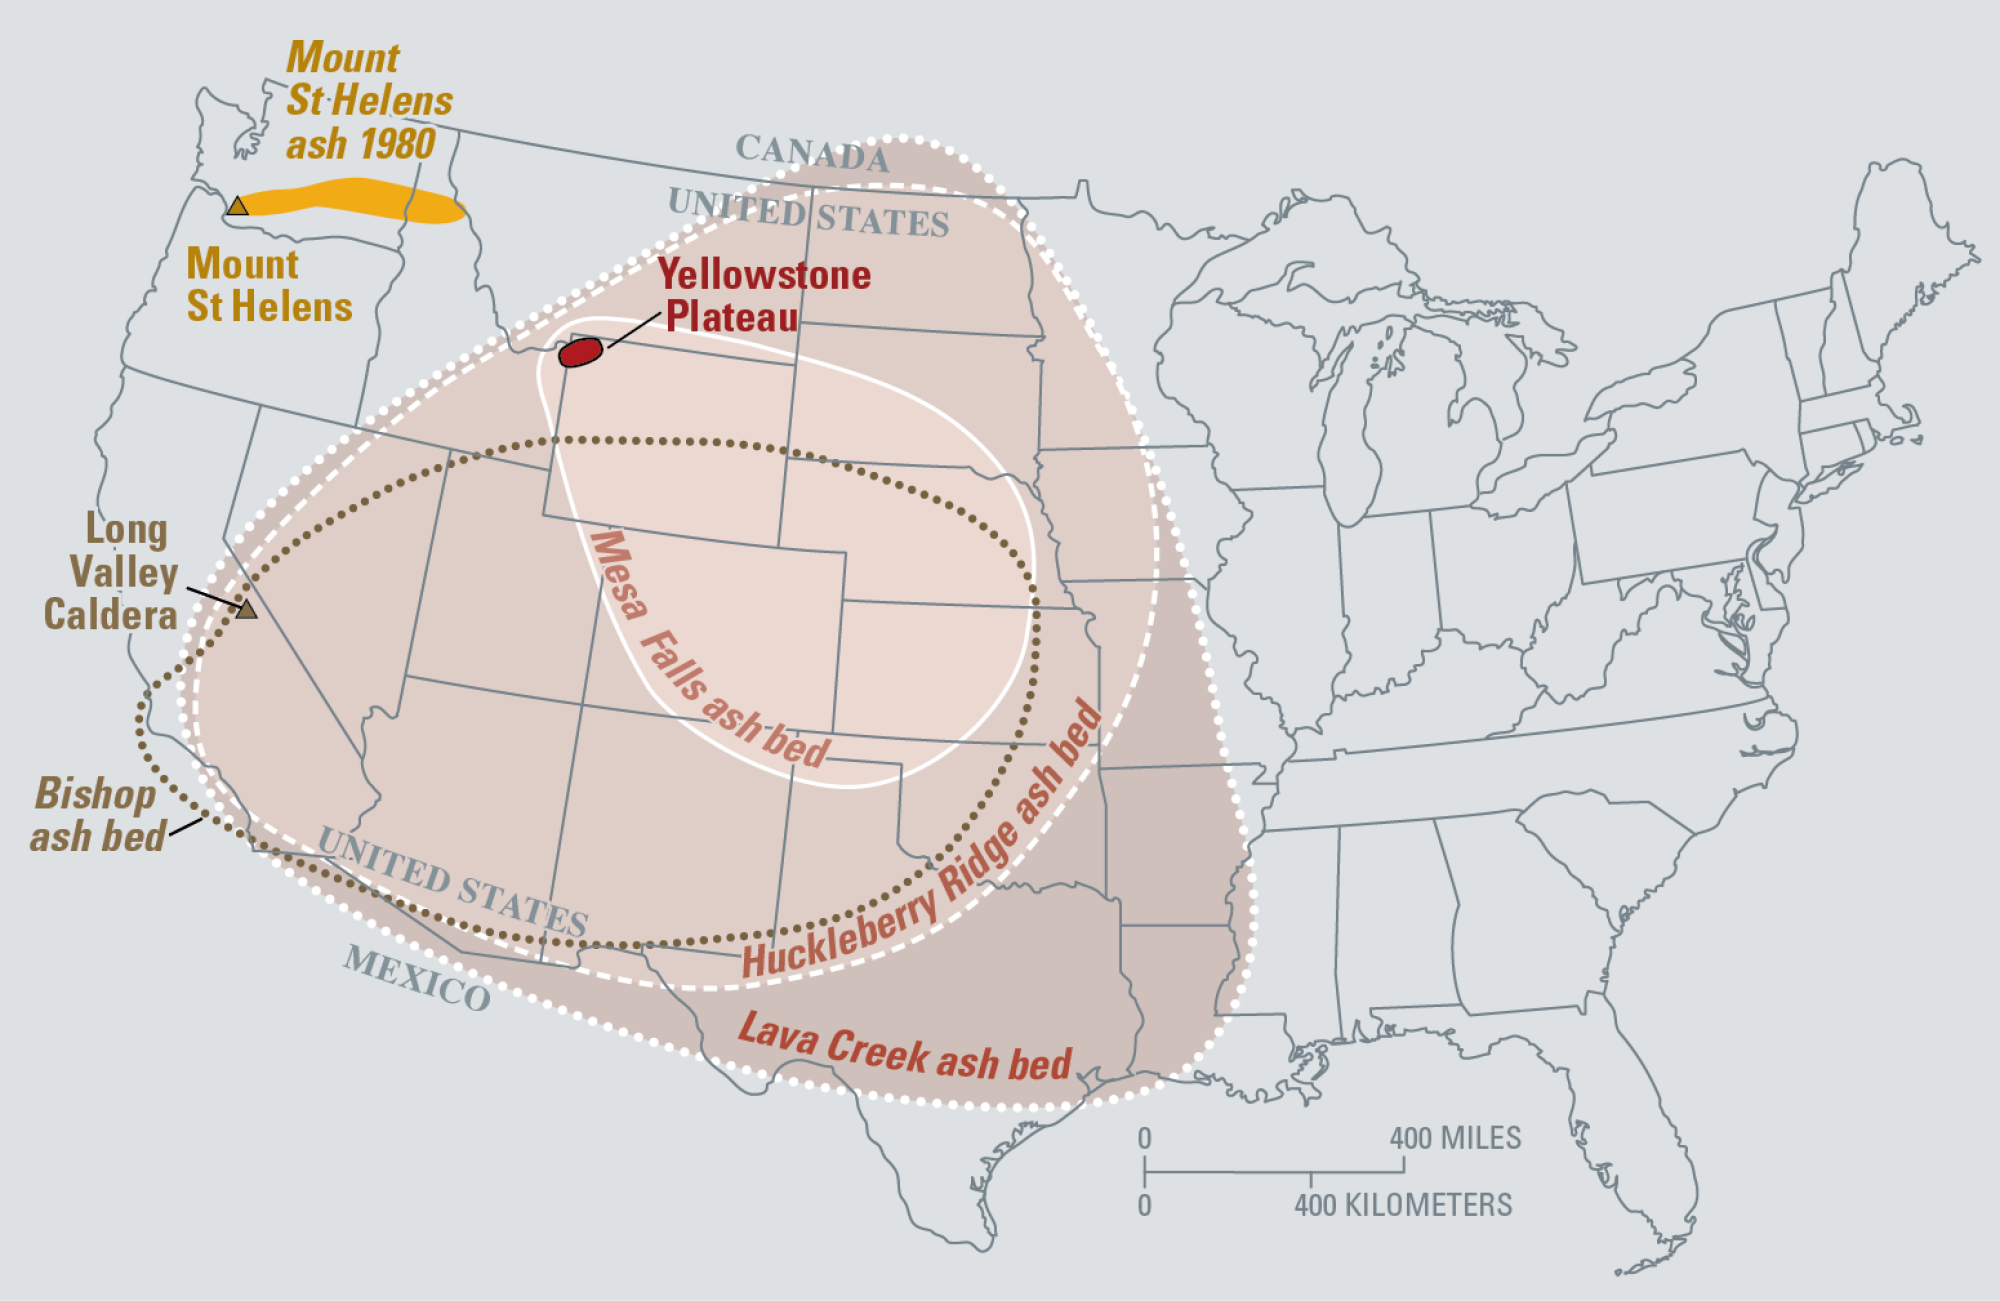 The two expansive regions within the dotted lines show where ash beds formed from two super-eruptions from the Yellowstone Plateau region over the past few million years.